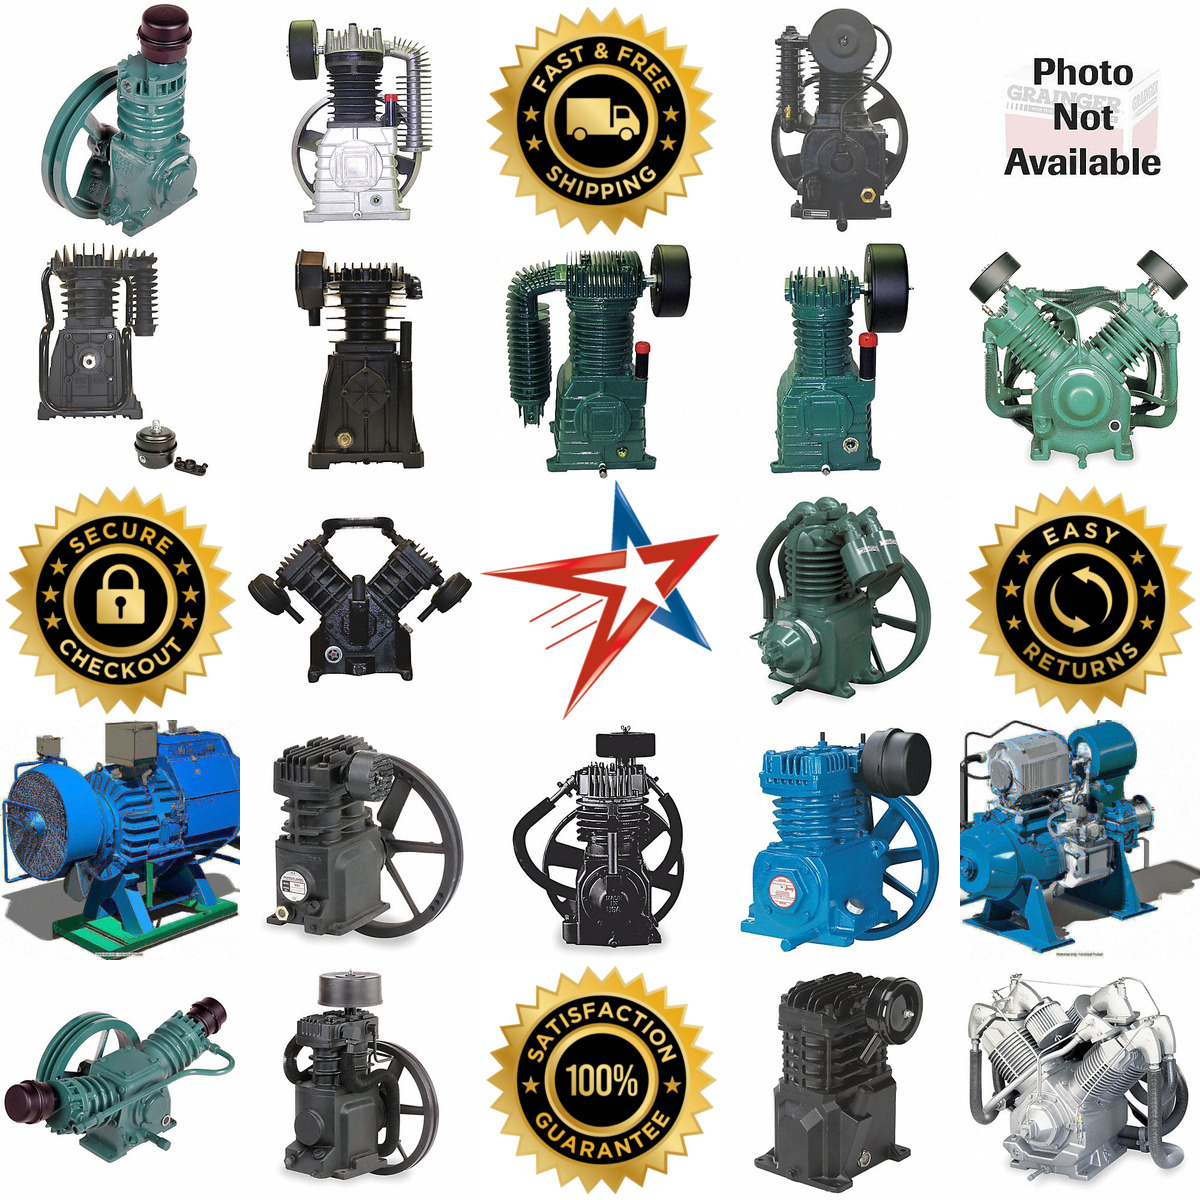 A selection of Air Compressor Pumps products on GoVets